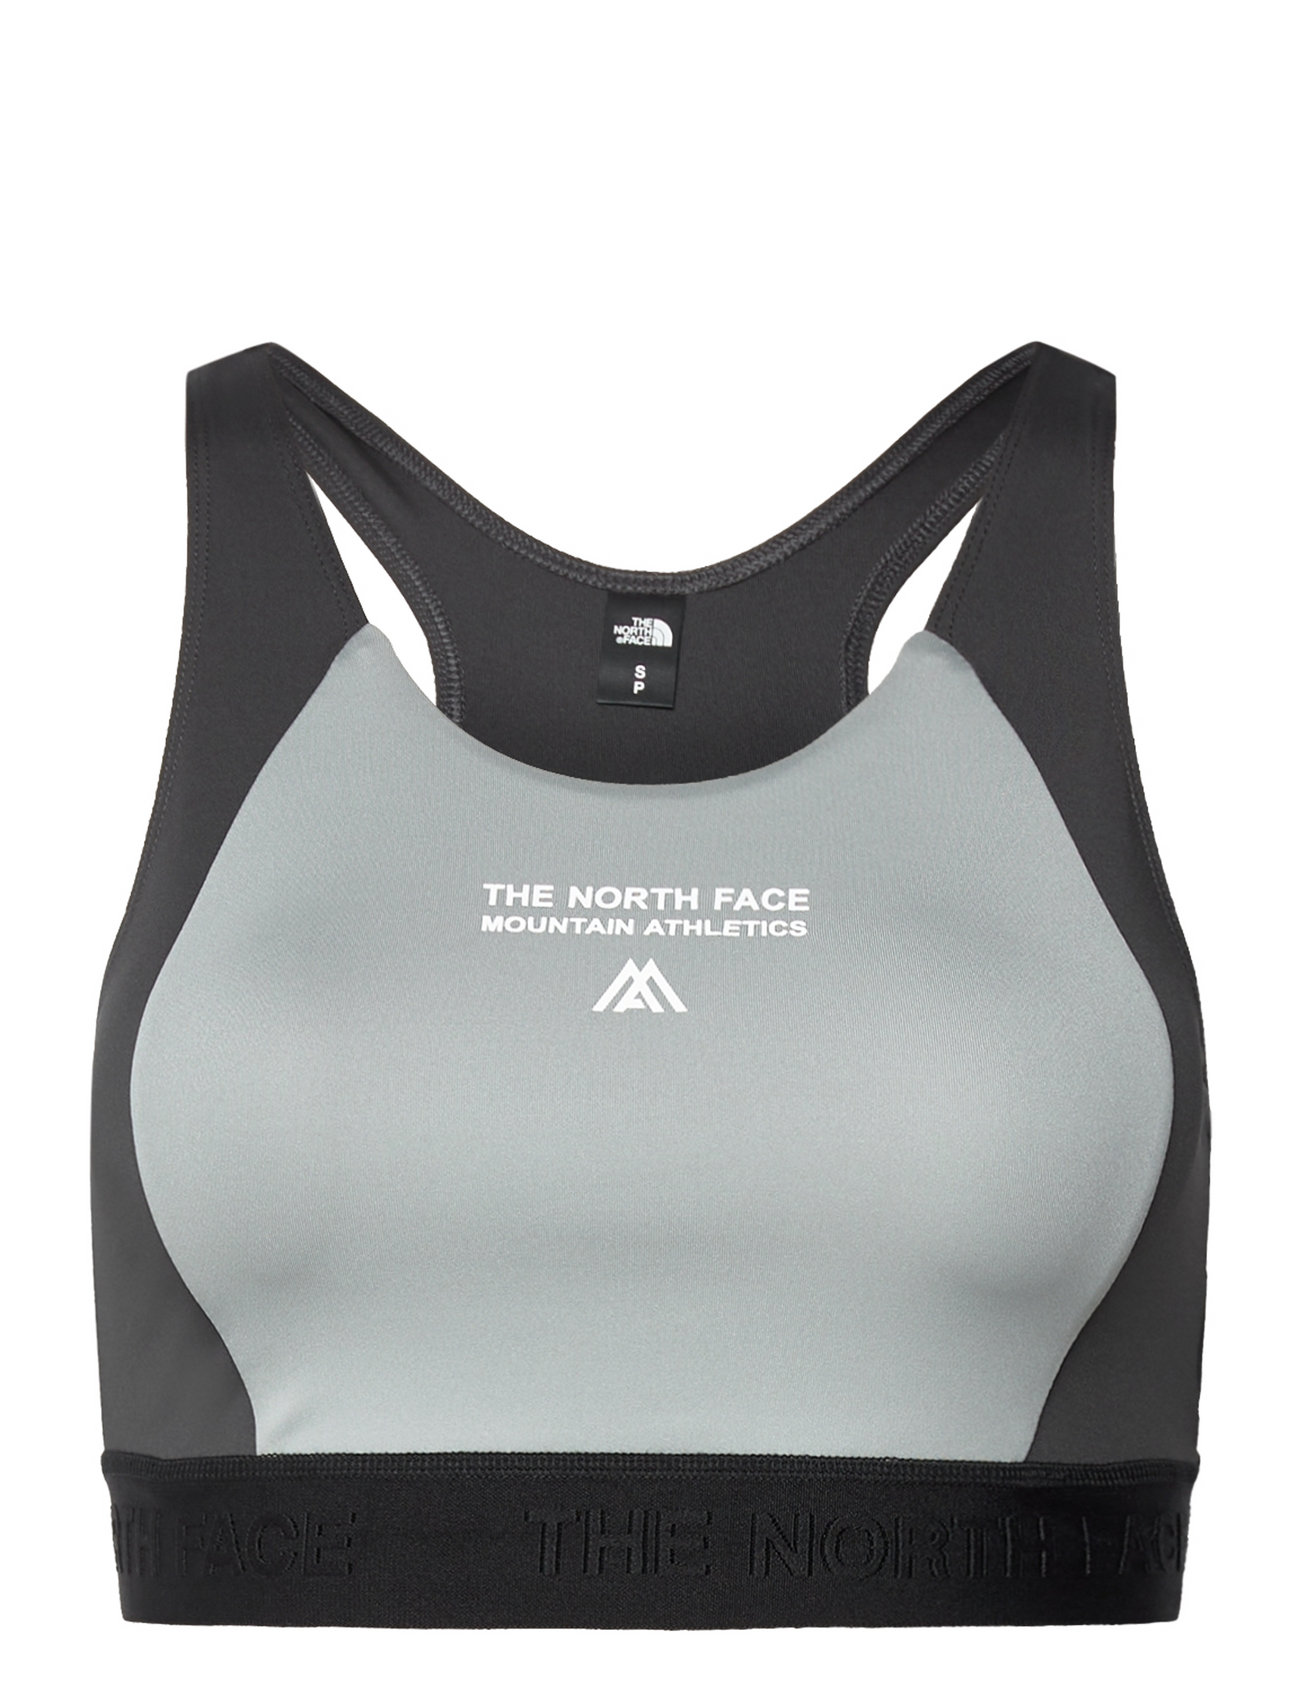 The North Face, Intimates & Sleepwear, The North Face Reversible Sports  Bra Large